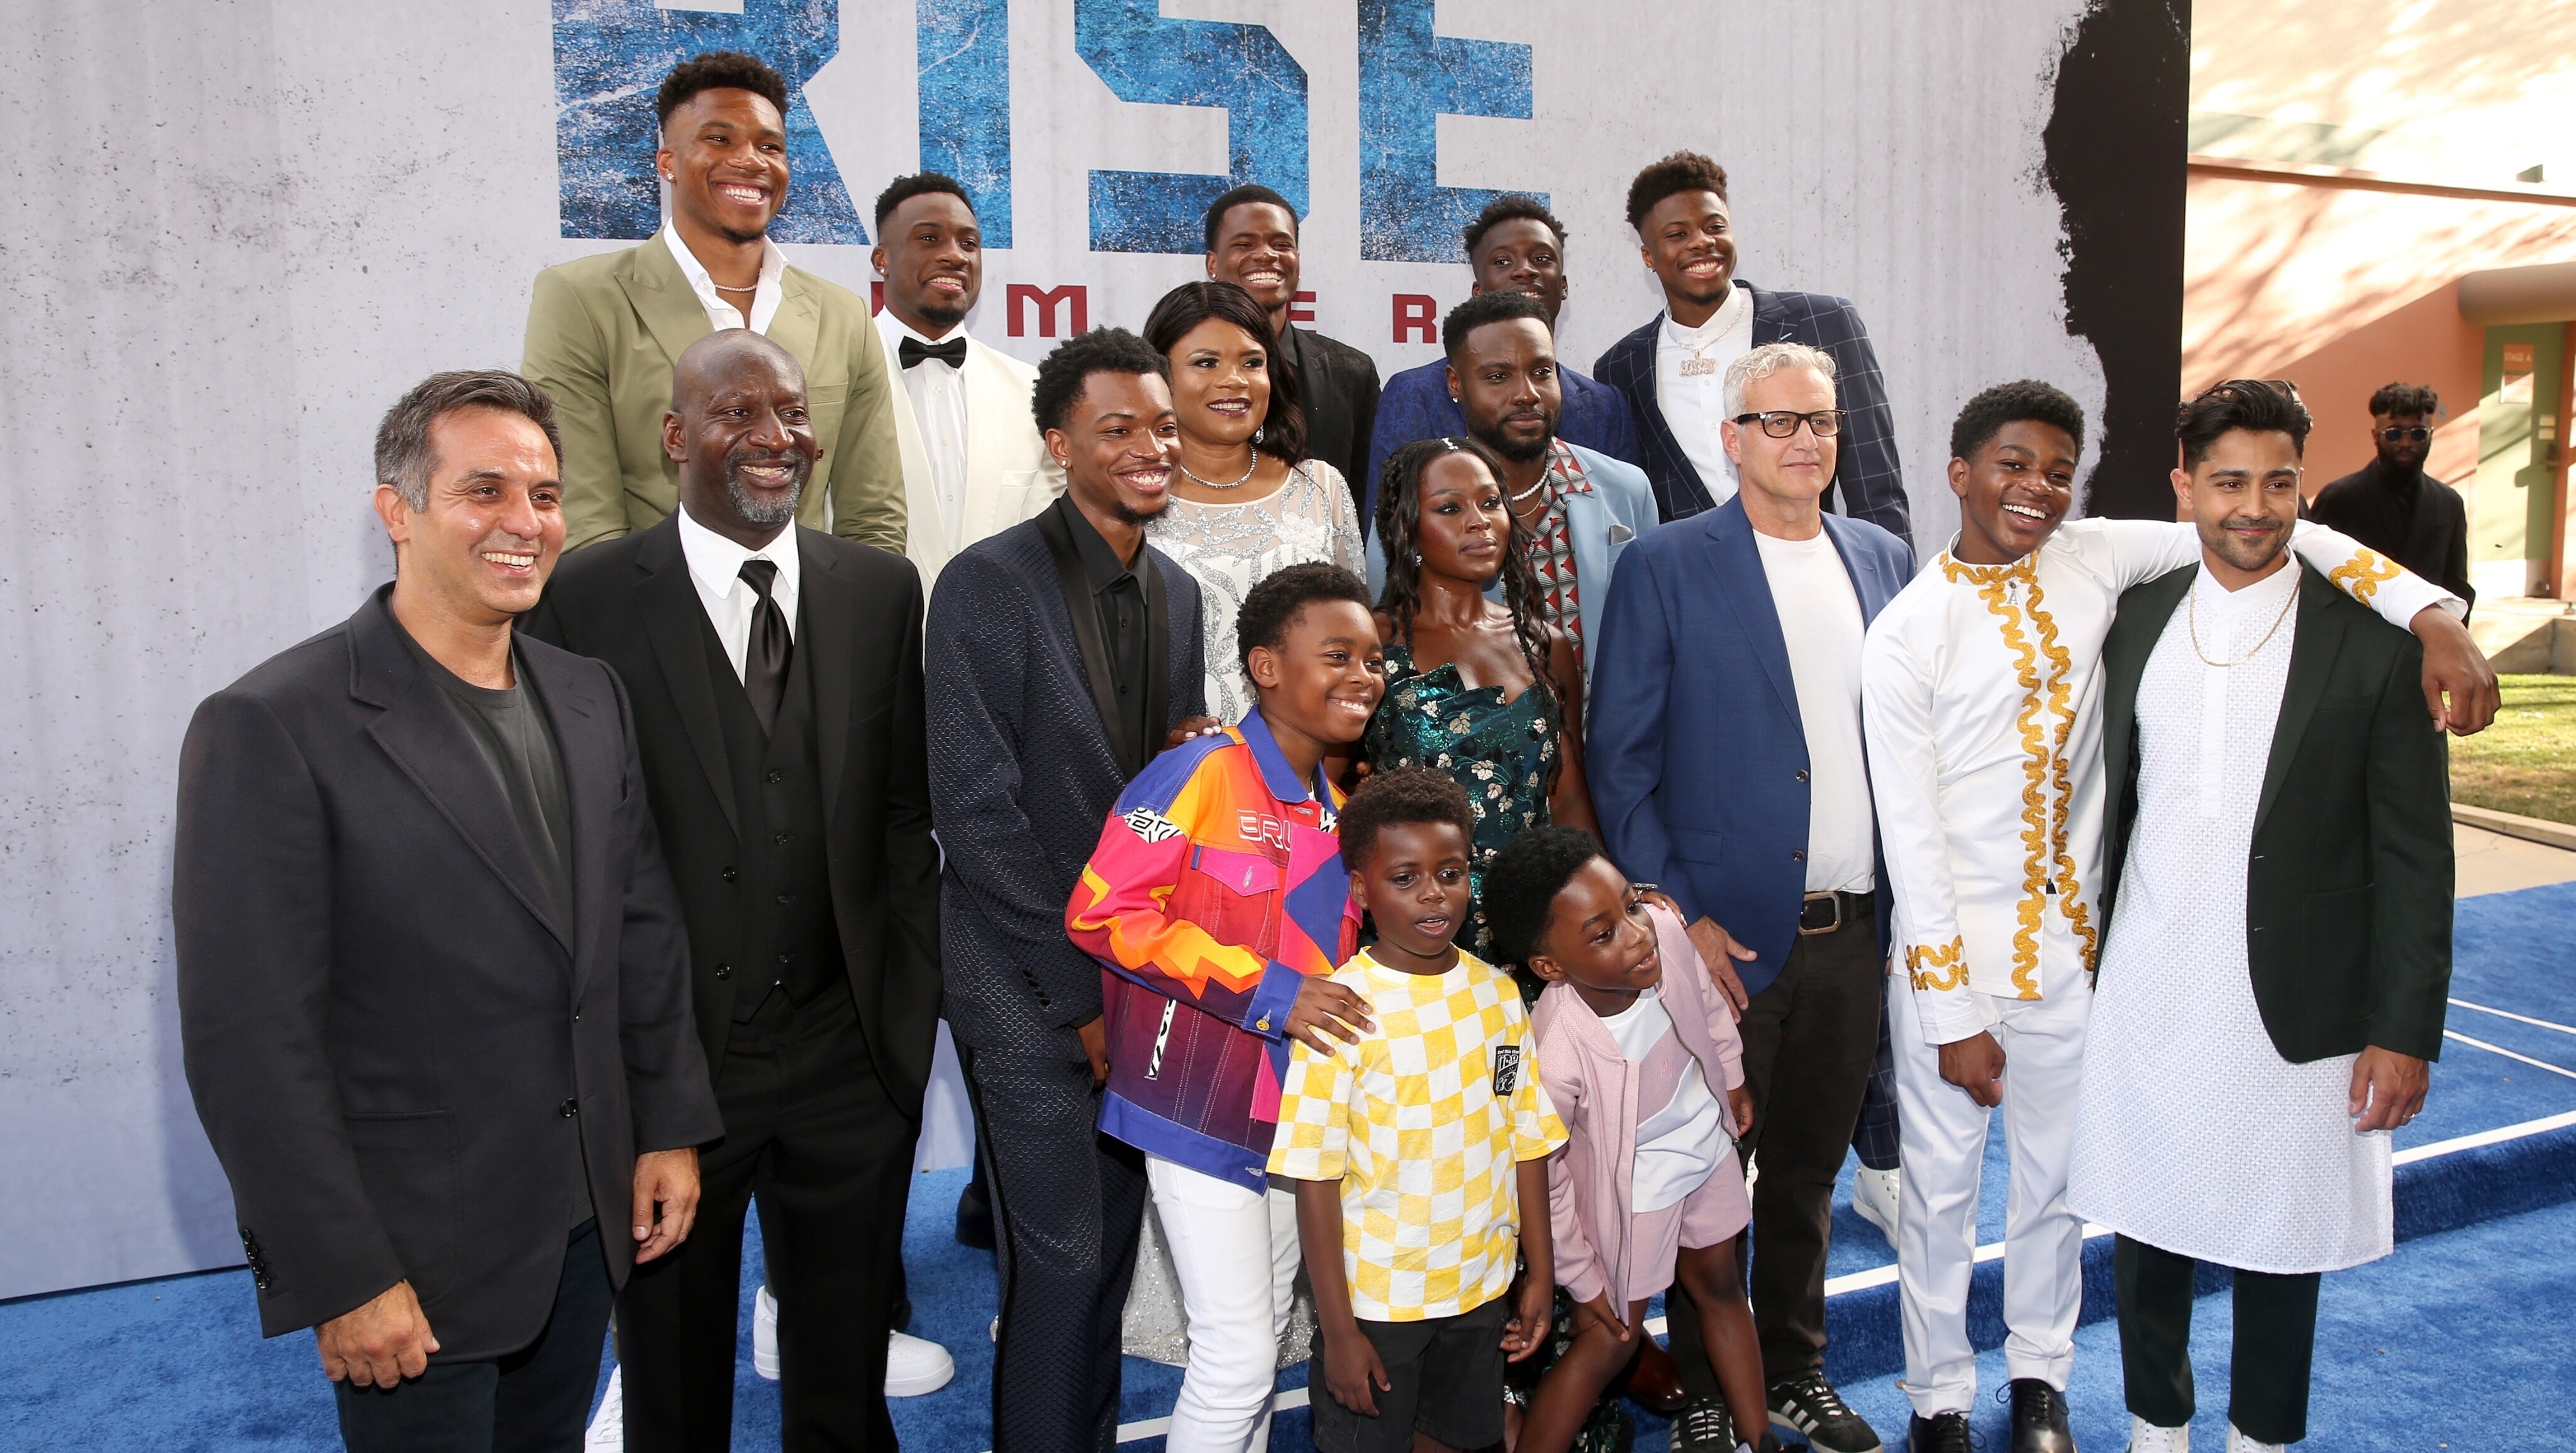 Footage And Stills From The World Premiere And Global Press Junket For The Disney+ Original Movie “Rise” Available Now